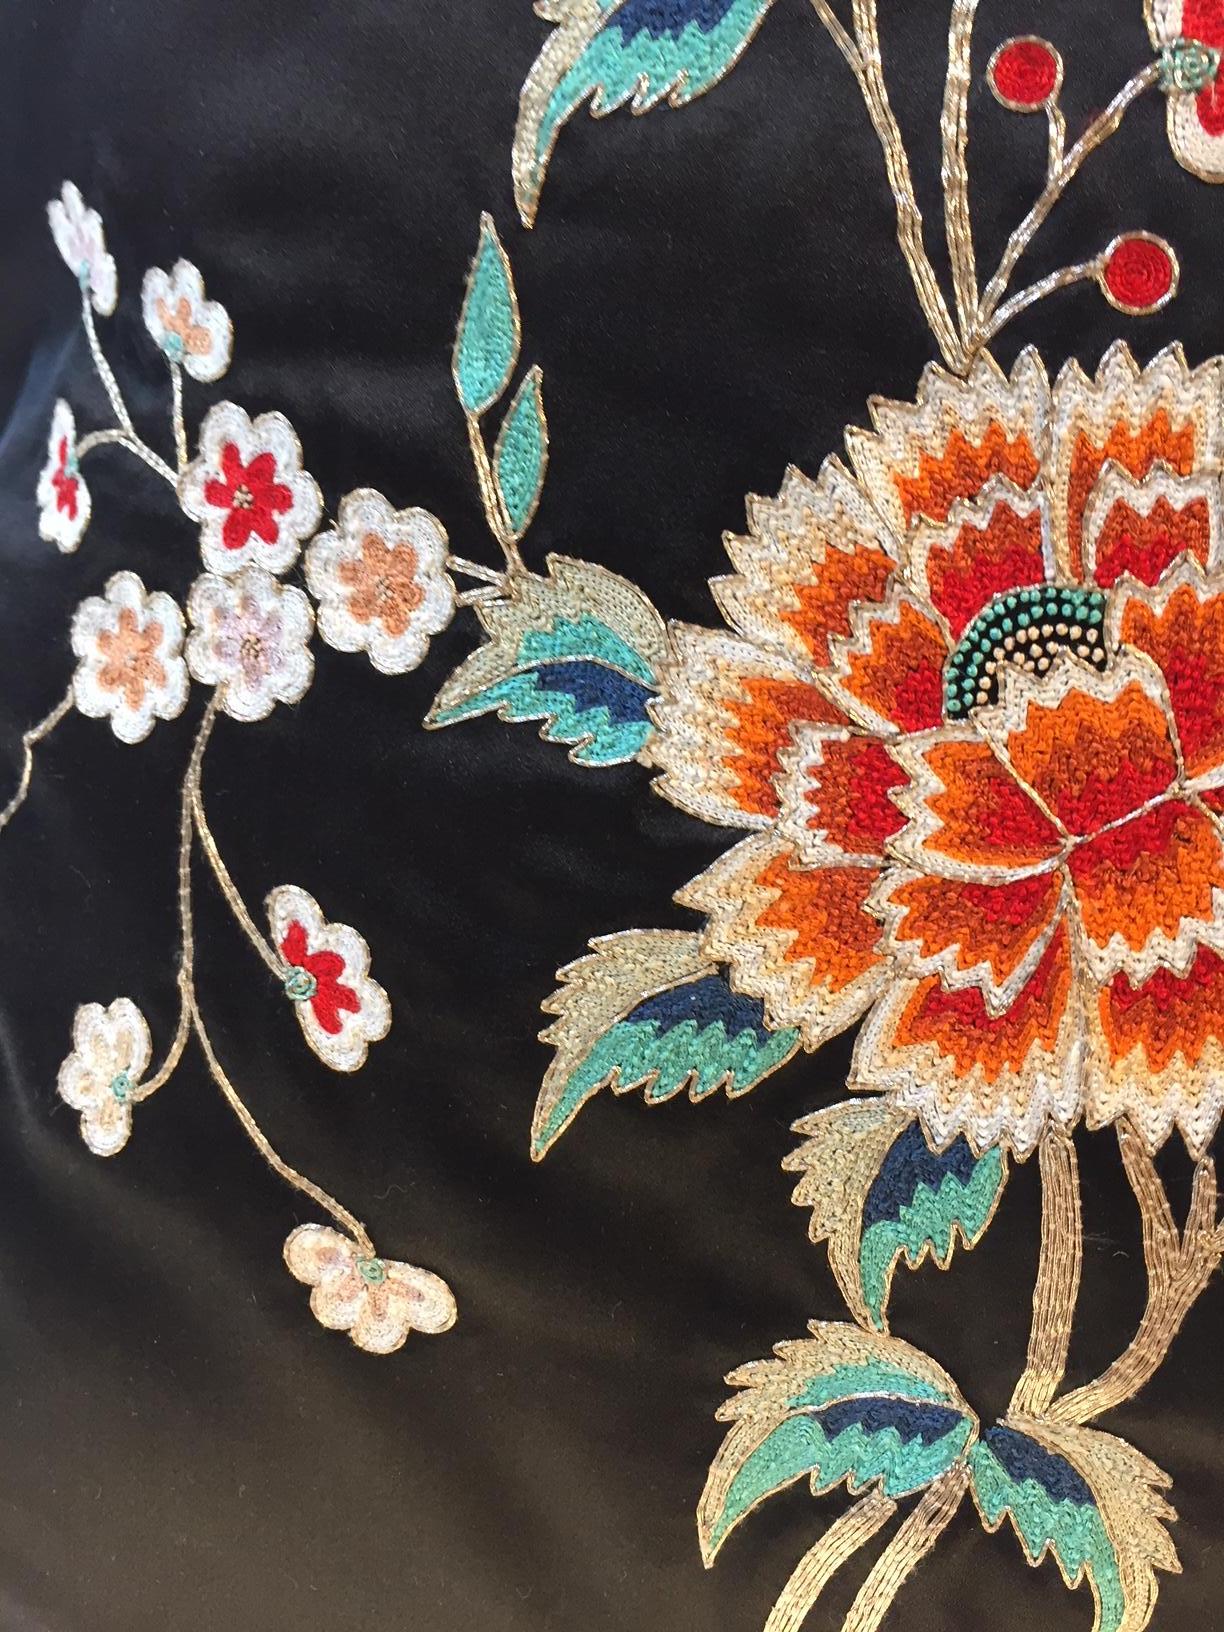 Decorative cushion silk satin col. black with Chinese inspired floral design hand embroidery with silk threads and high lights in silver thread, very fine piping in silk color ginger, 45 cm x 45 cm, cushion cover with cotton lining, feather inner